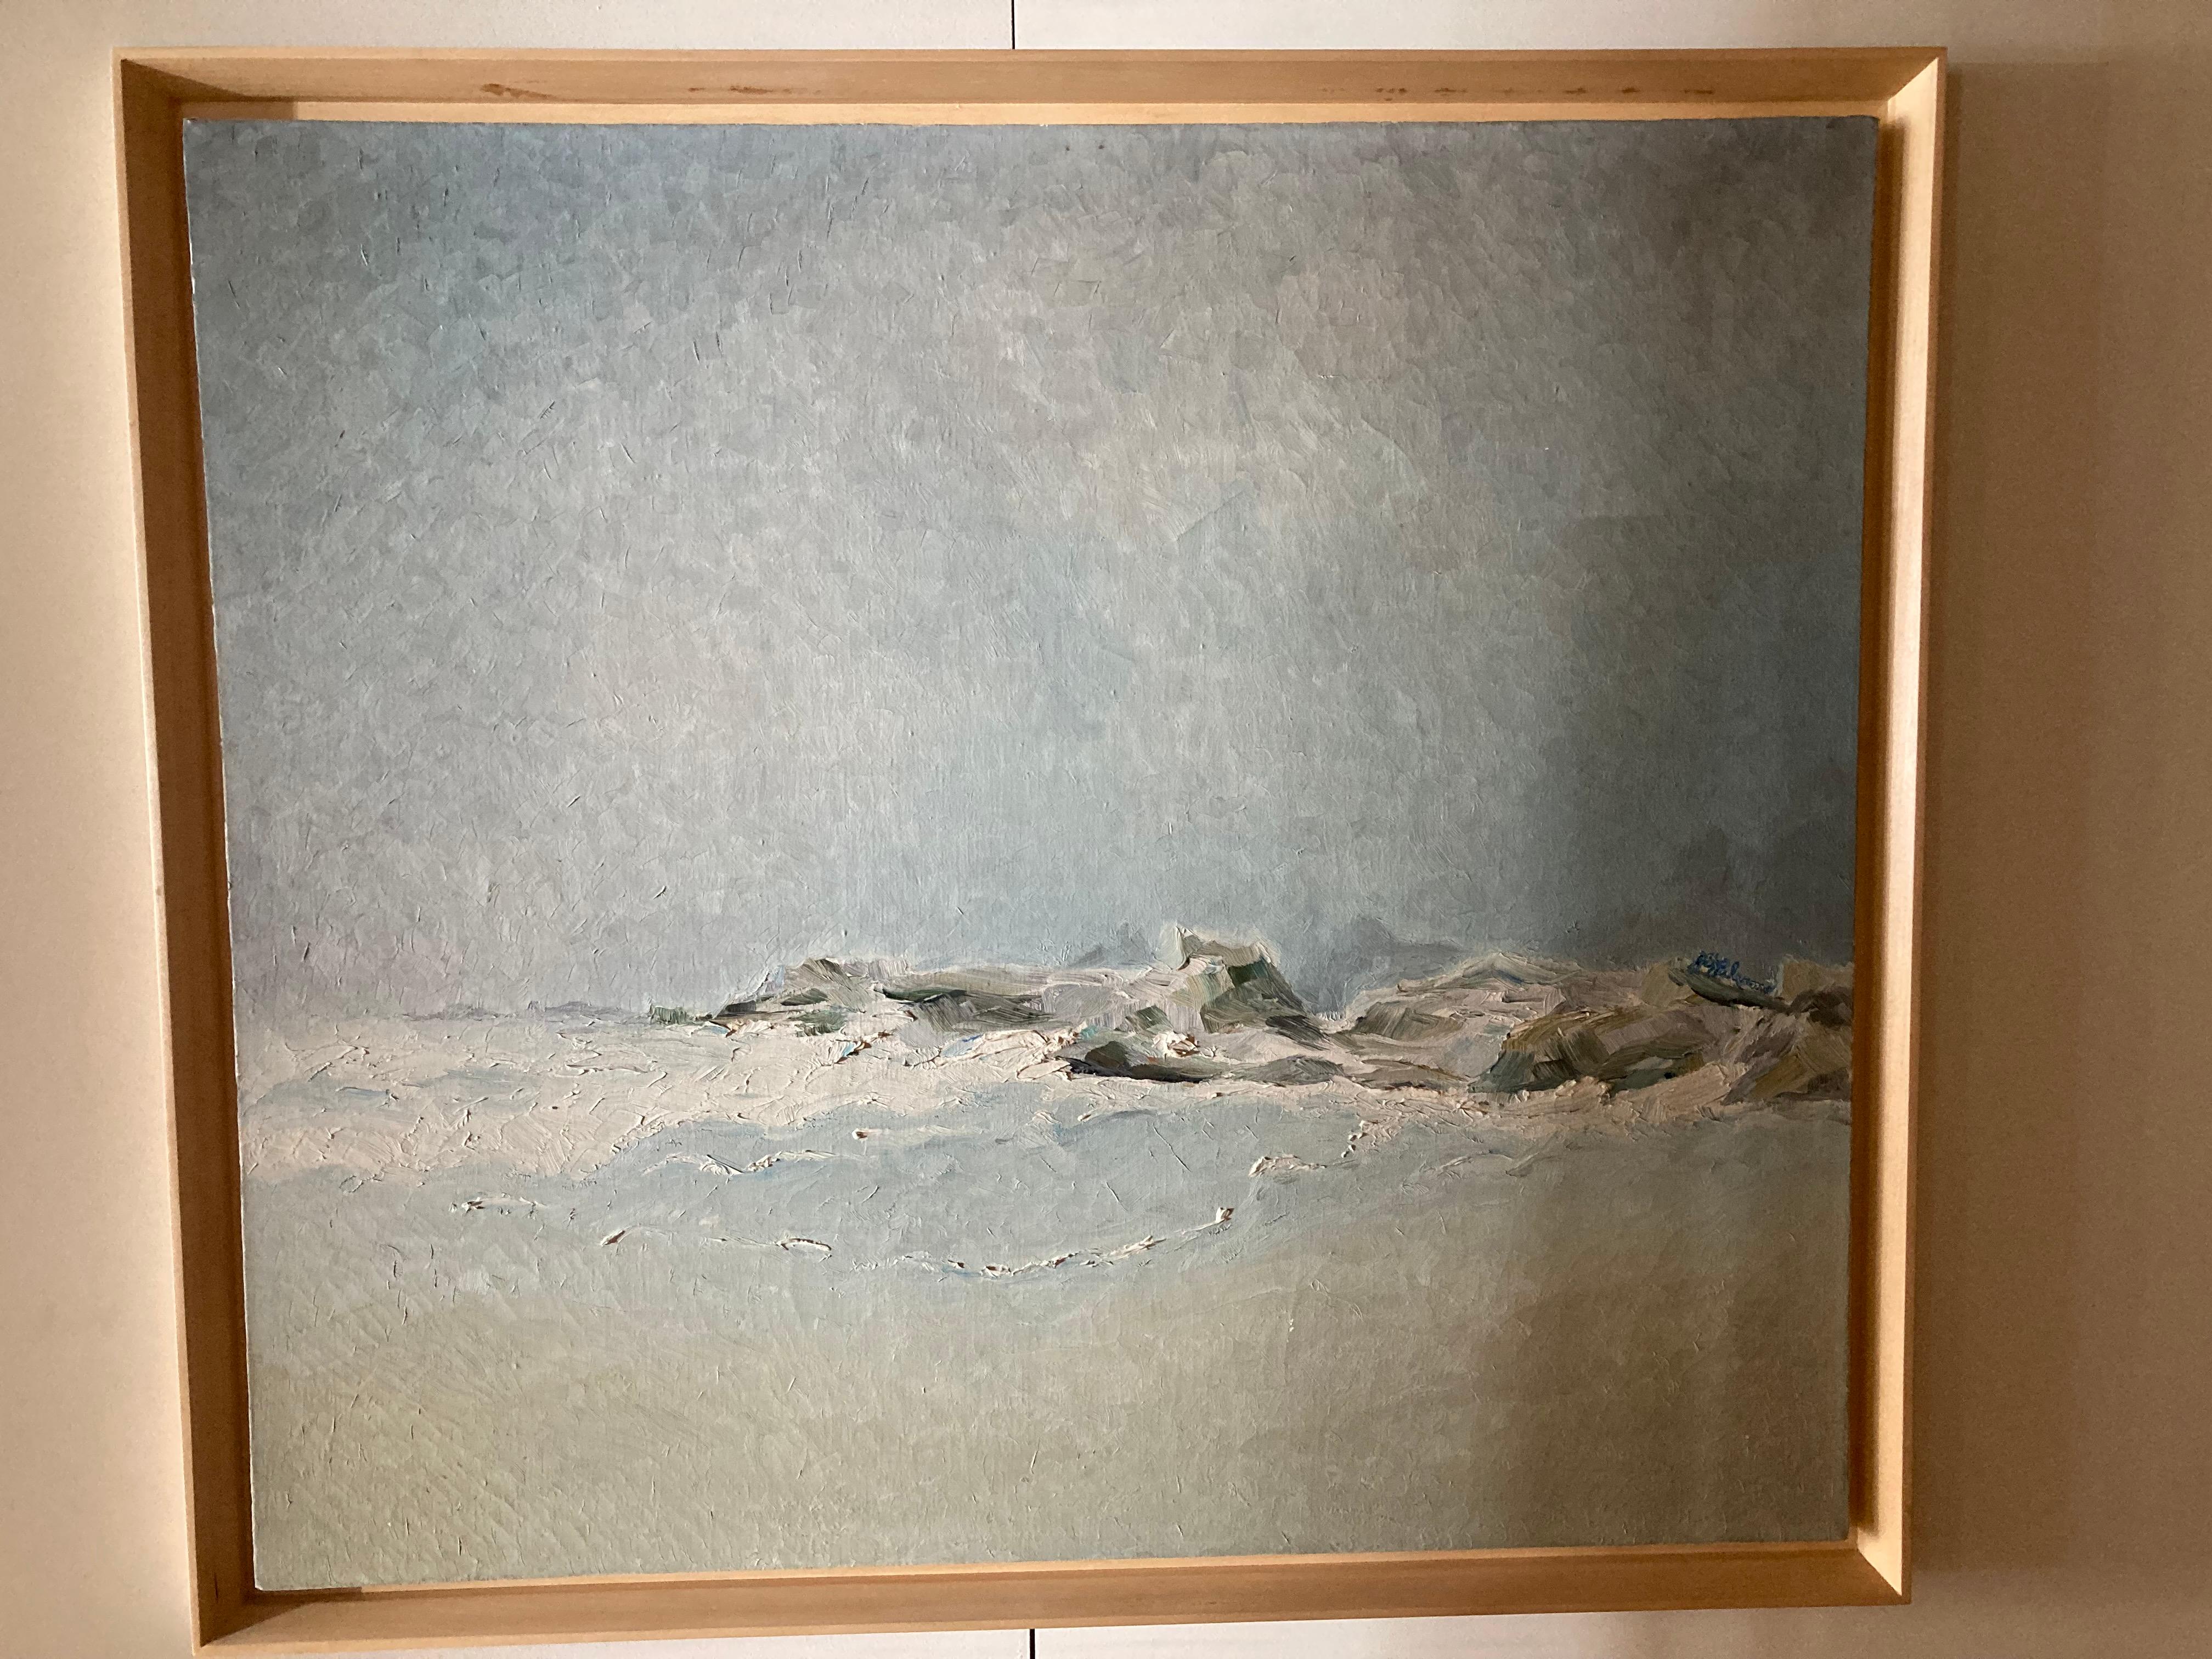 Wonderful abstract seascape painting, circa TBD
Acrylic on canvas with birch frame.
Subtle stokes of the brush marks creating texture on the canvas mimic the crashing of the waves on the outcropping of rocks. 
Artist Signed : Rich or Ruth Palermo